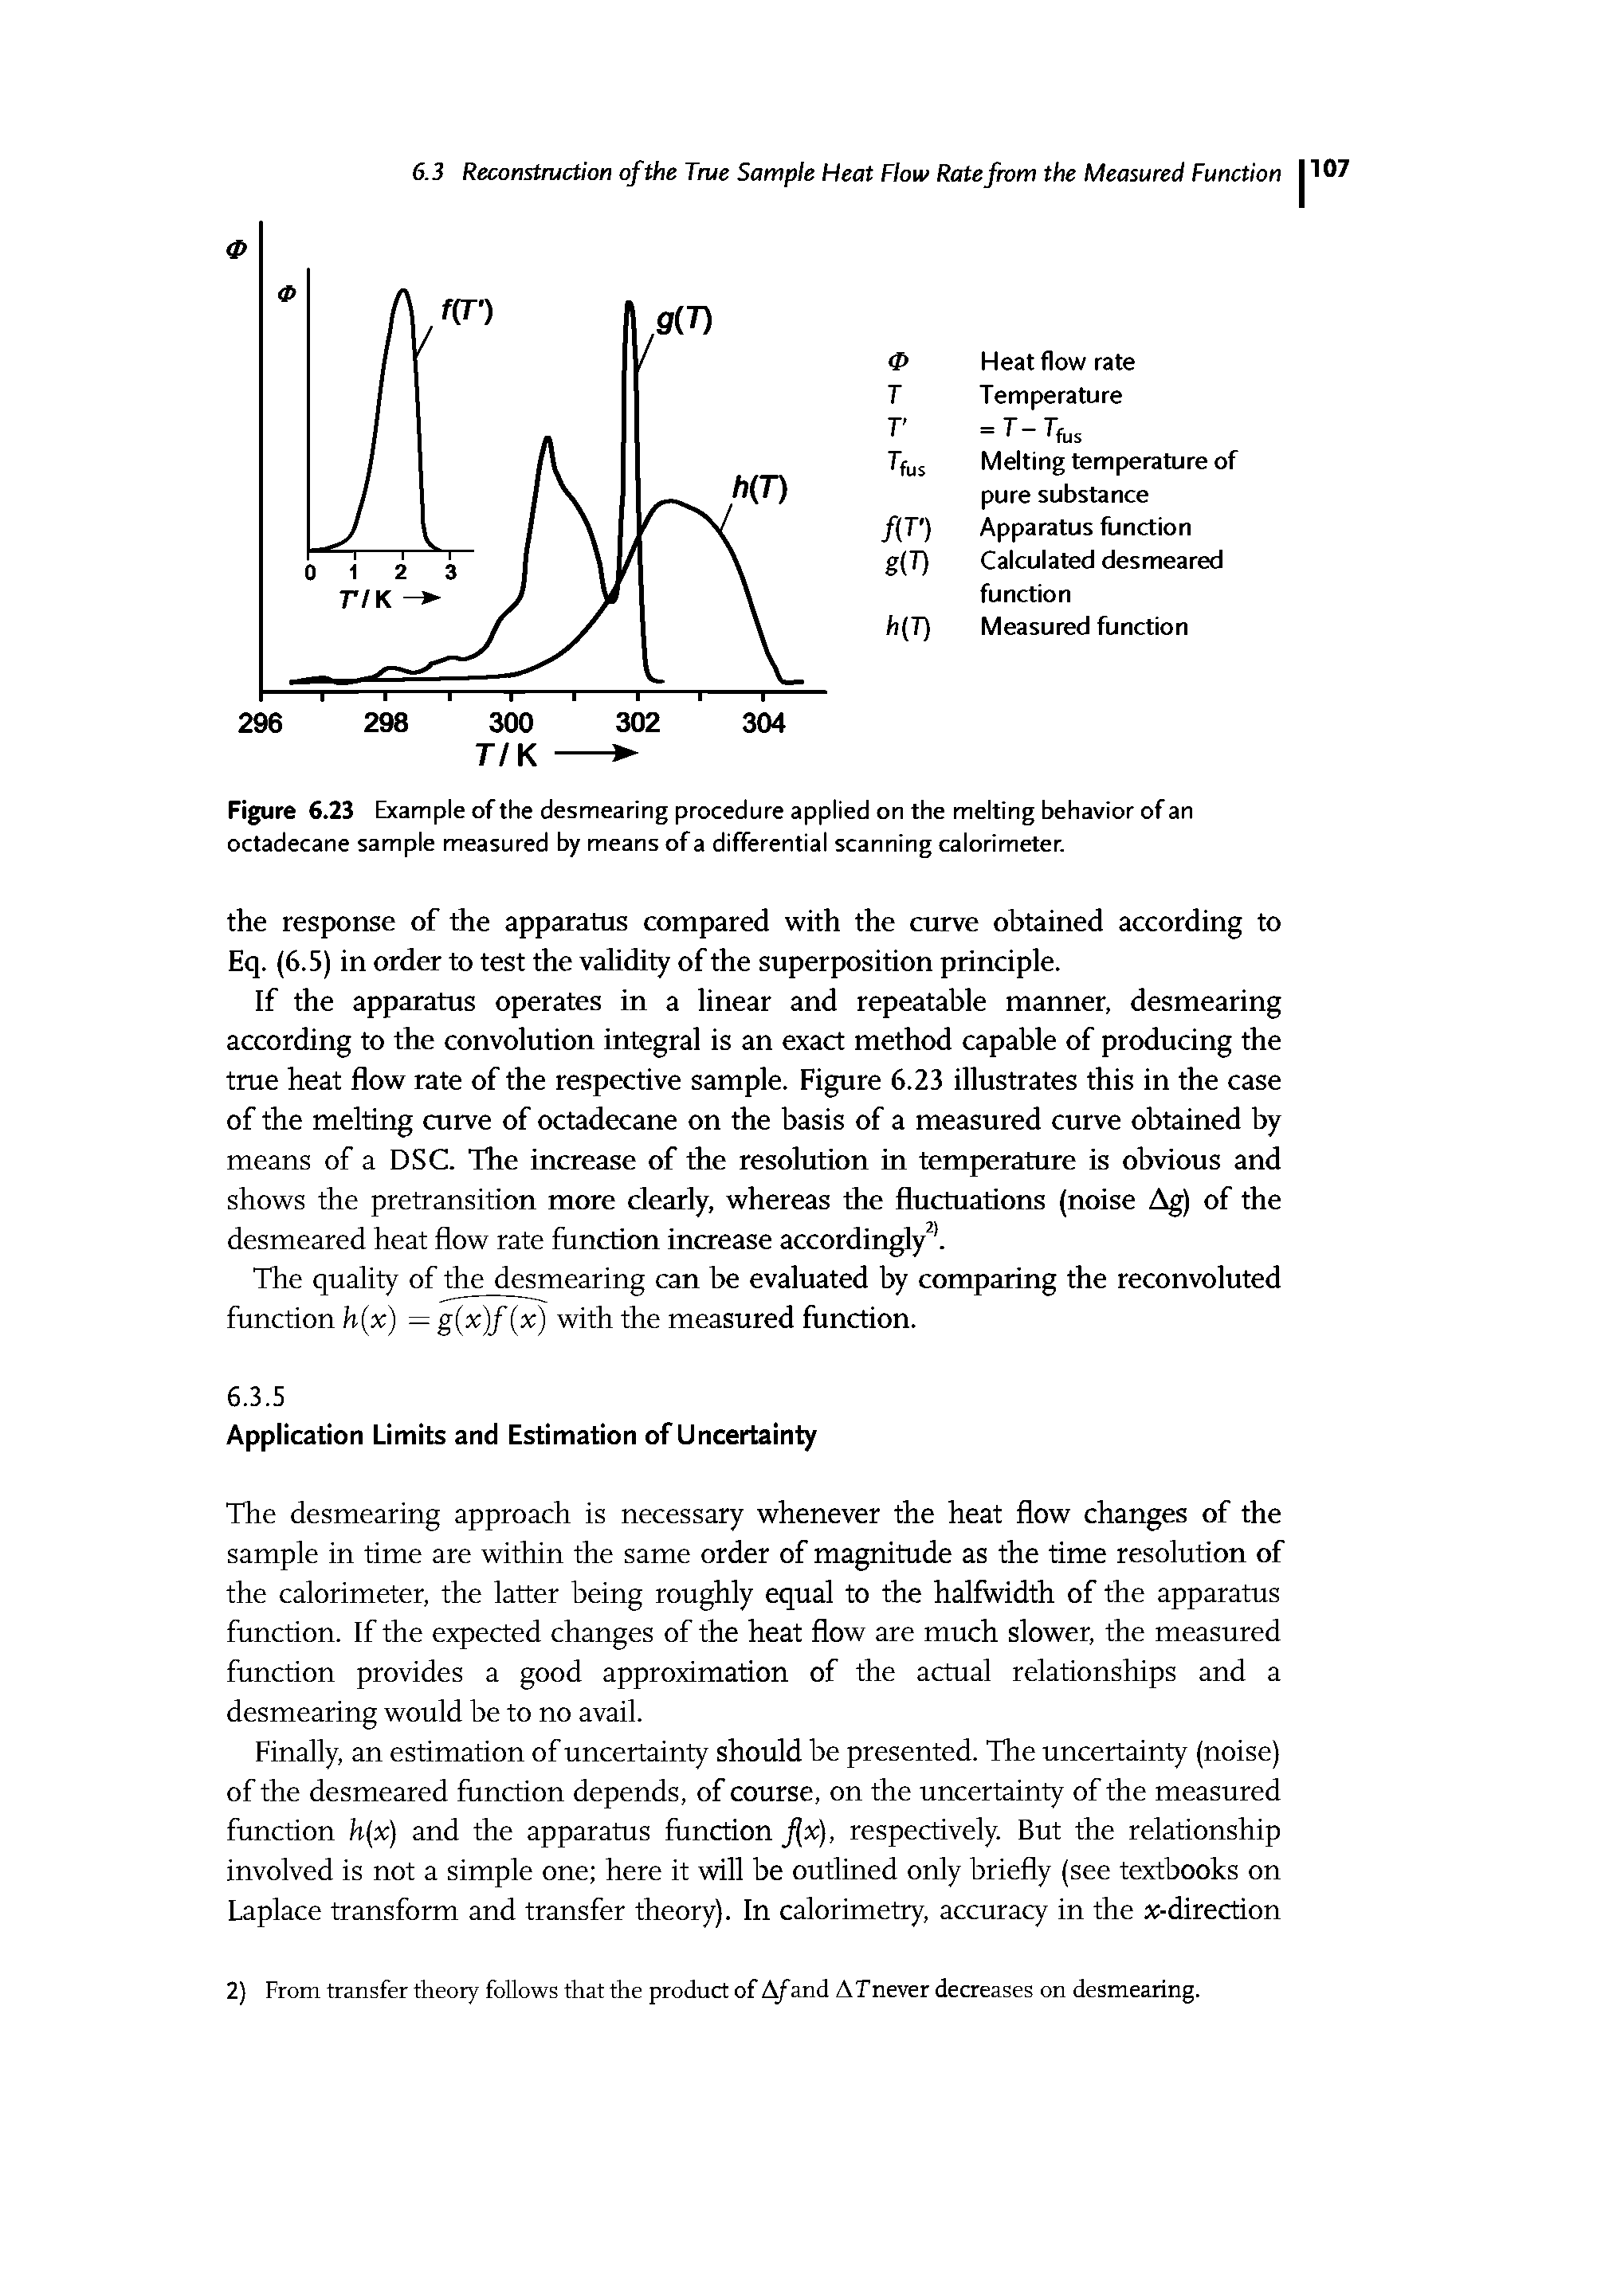 Figure 6.23 Example of the desmearing procedure applied on the melting behavior of an octadecane sample measured by means of a differential scanning calorimeter.